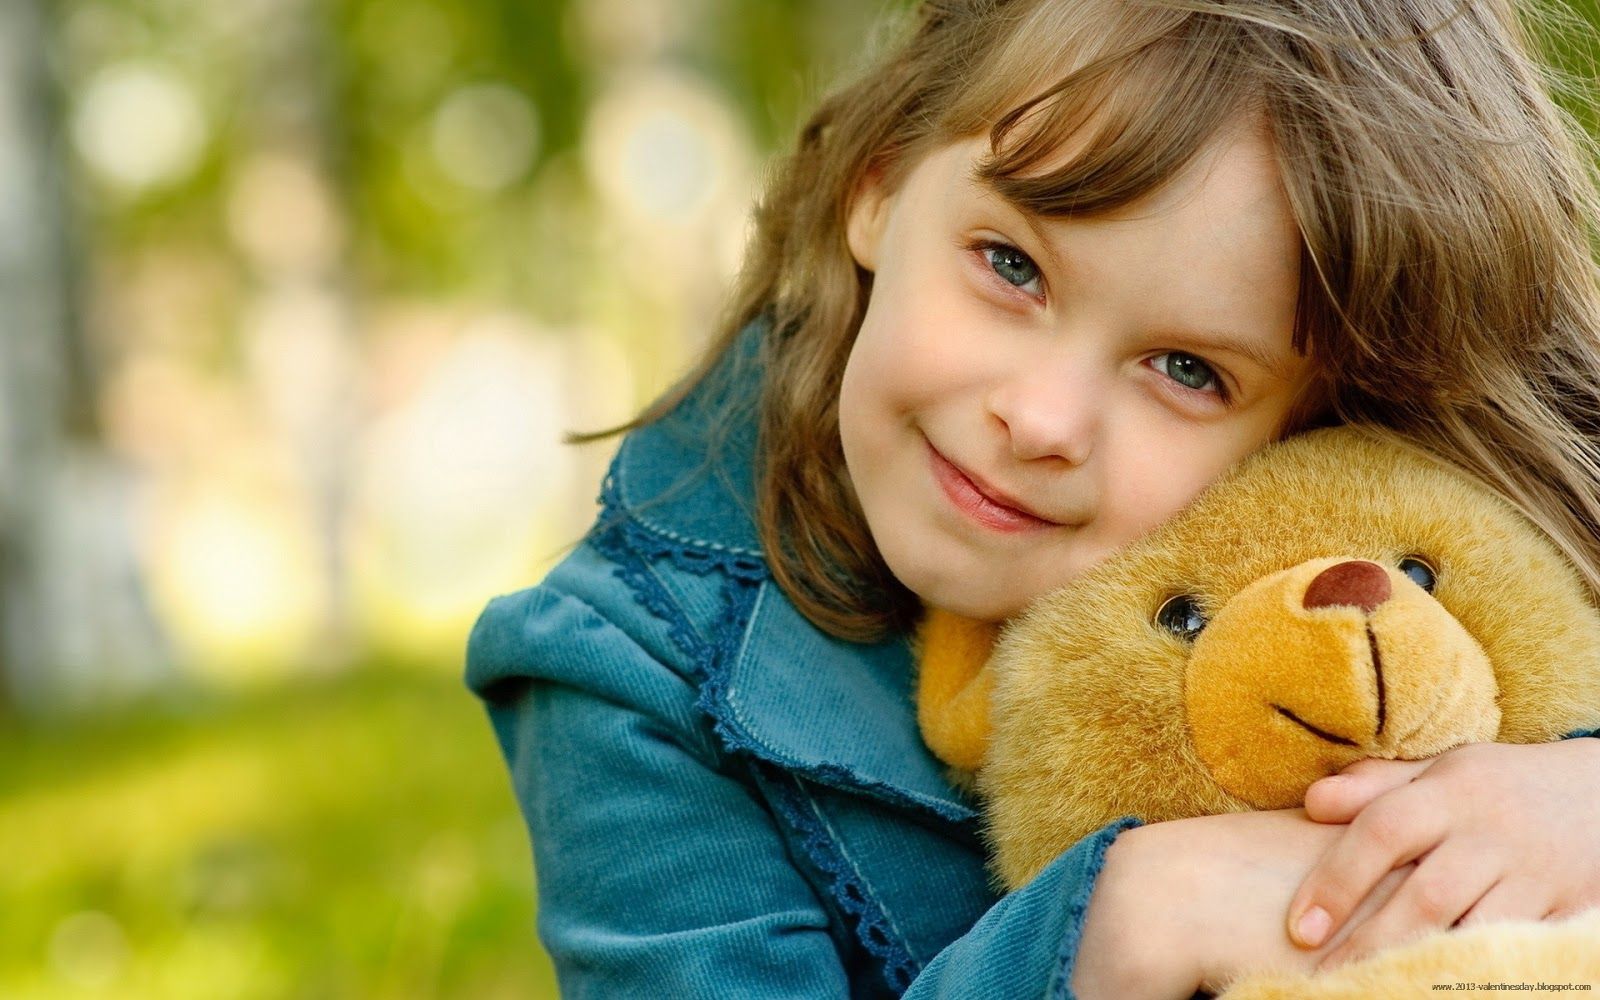 Download Cute Girl With Teddy Bear Wallpaper | Full HD Wallpapers